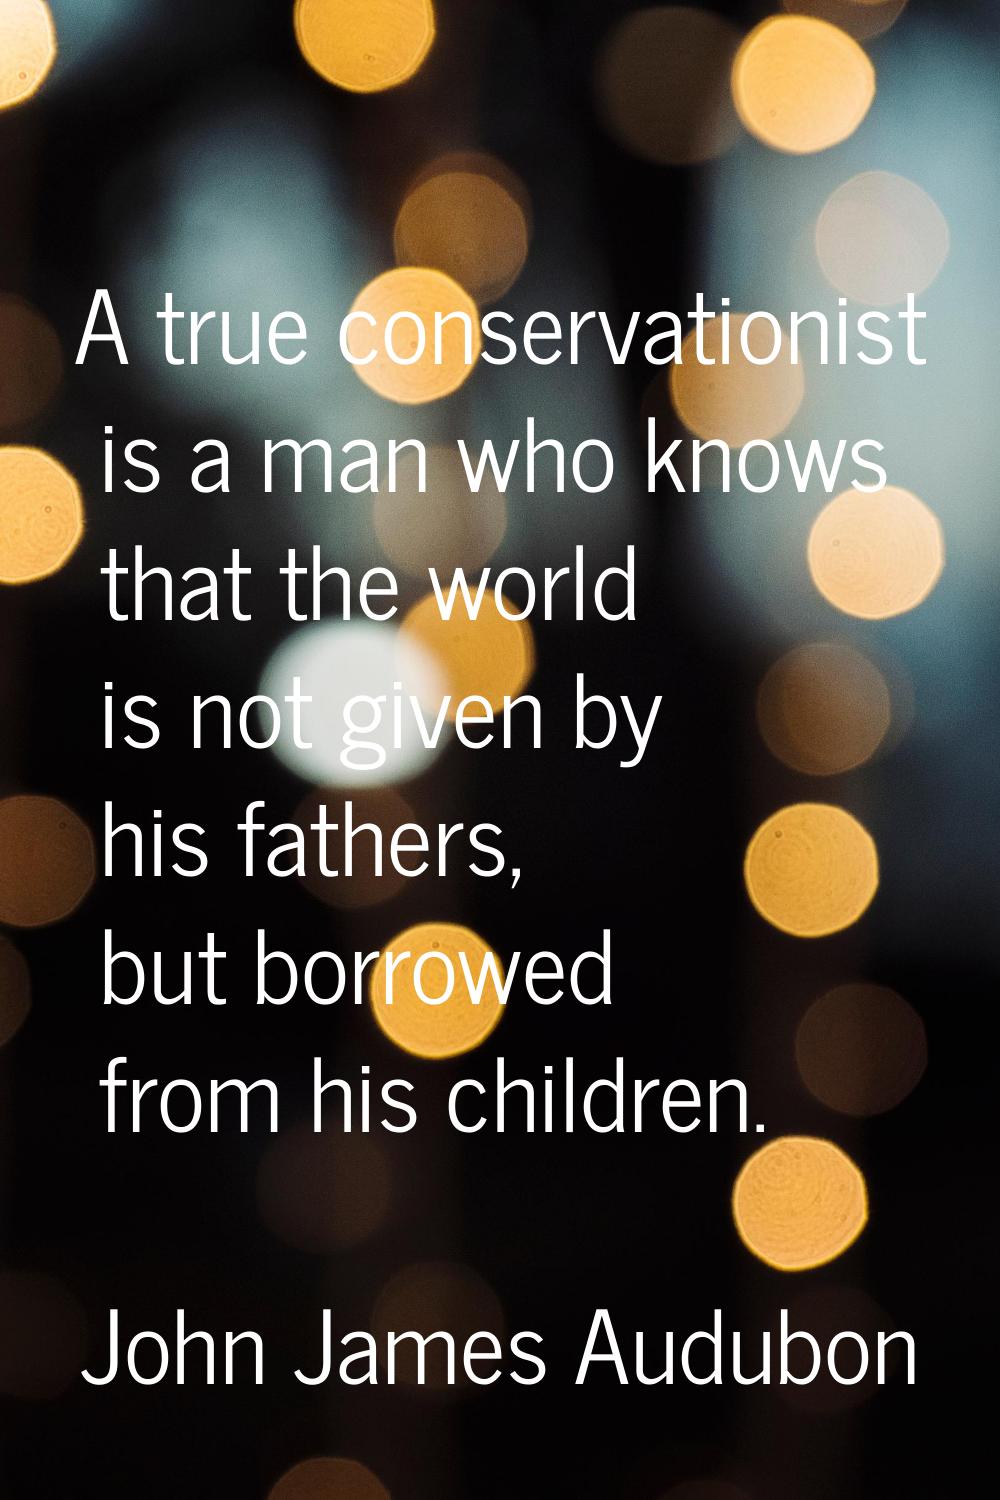 A true conservationist is a man who knows that the world is not given by his fathers, but borrowed 